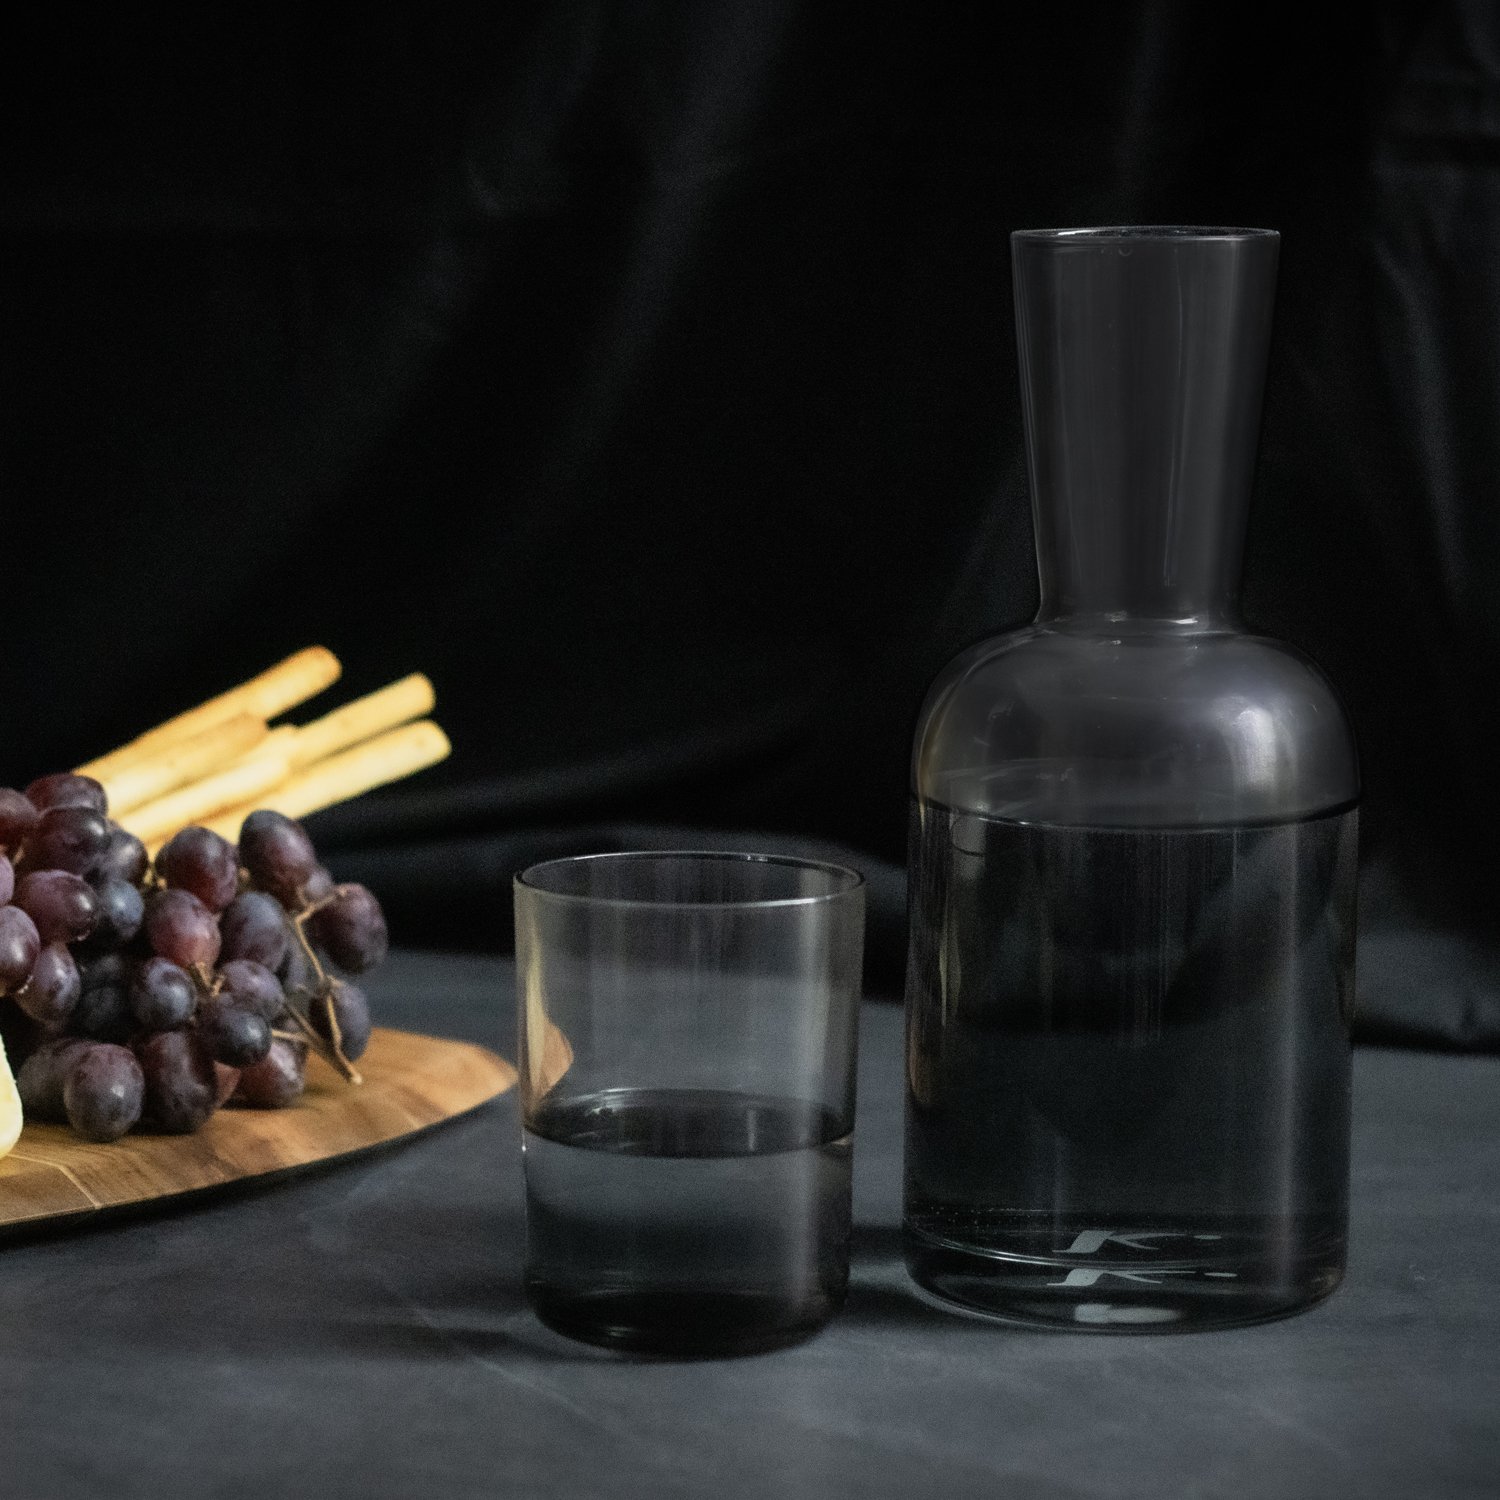 Designed to elevate the everyday. ⁠How can you not love this new carafe and tumbler set?

Order yours now from one of our many New Zealand or Australian stockists at www.keepsake.nz/stockists